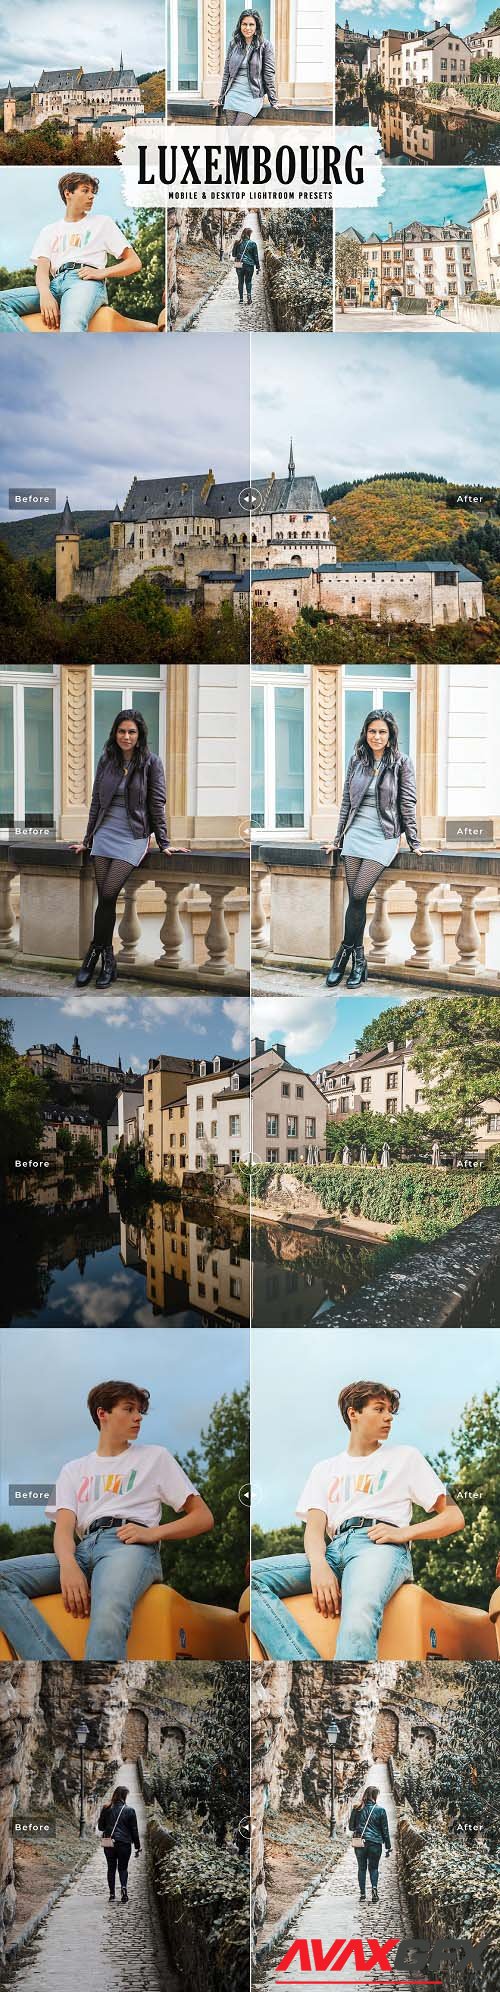 Luxembourg Pro Lightroom Presets - 6284041